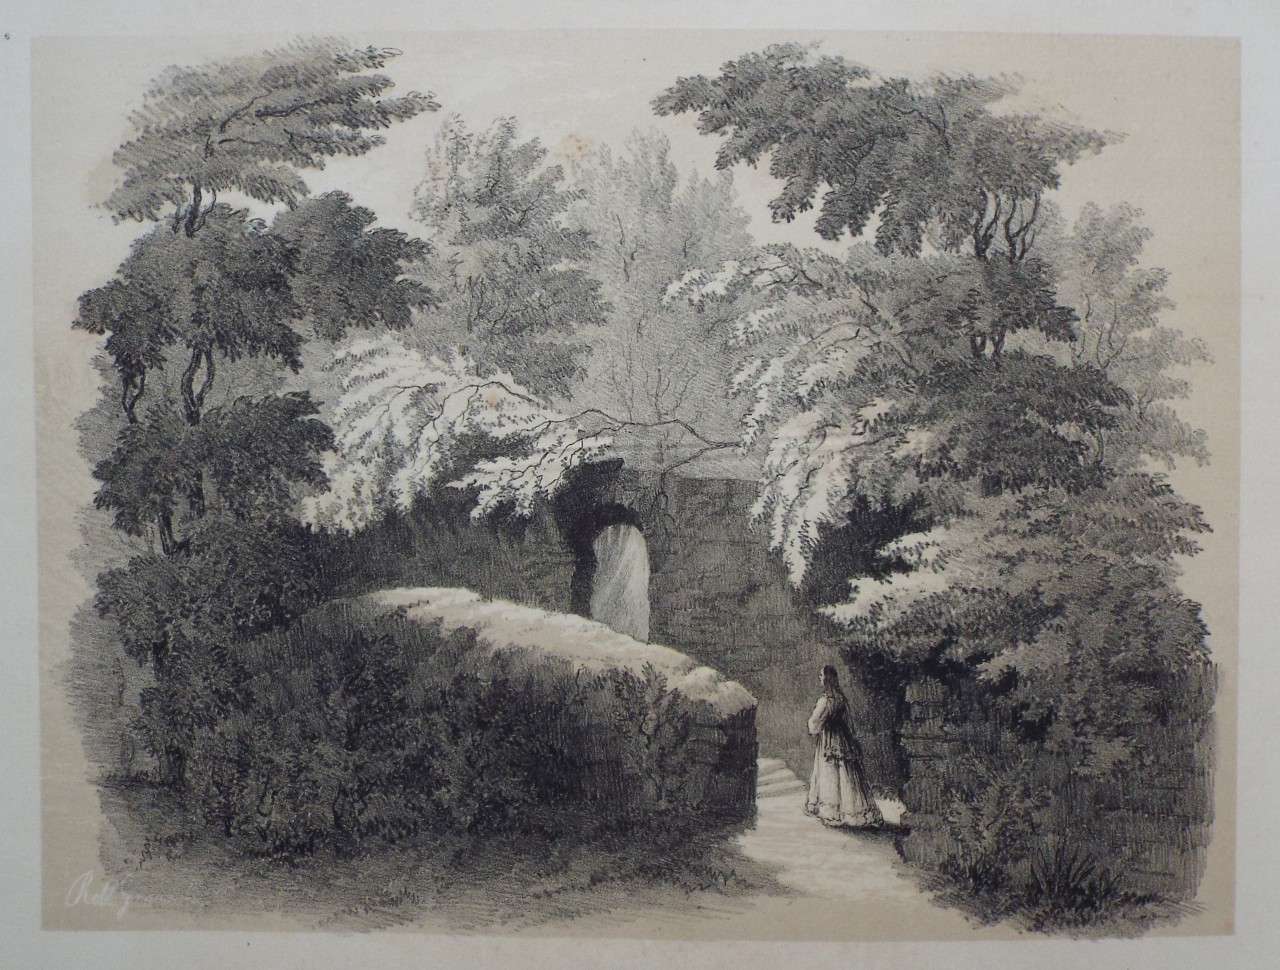 Lithograph - View in the Garden where the Sarcophagus stood before removal. - Groom